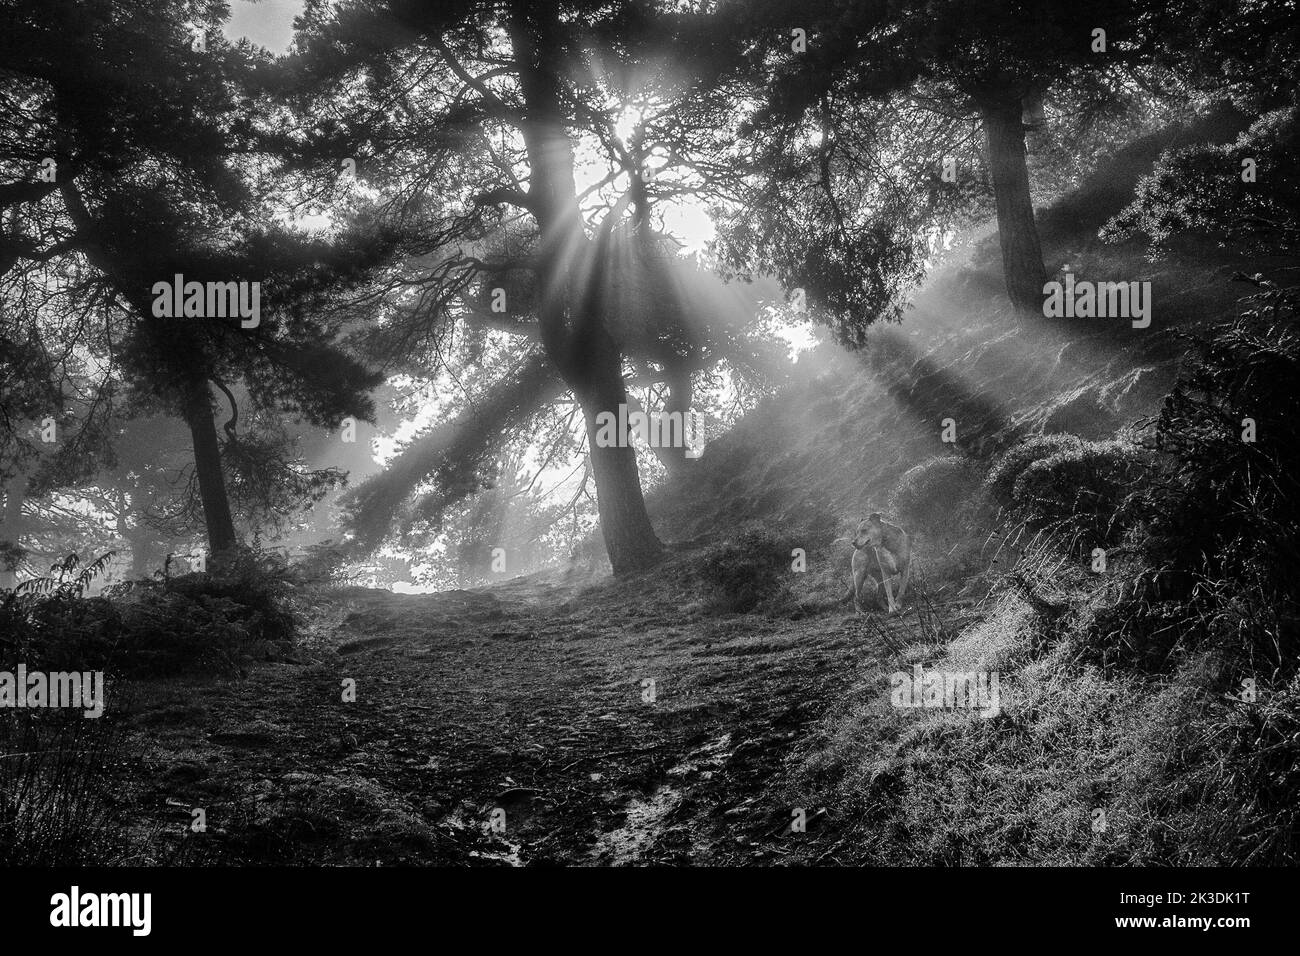 Dog in the woods in monochrome with sunbeams shining through mist highlighting the sun's rays, Ilkley Moor, UK Stock Photo